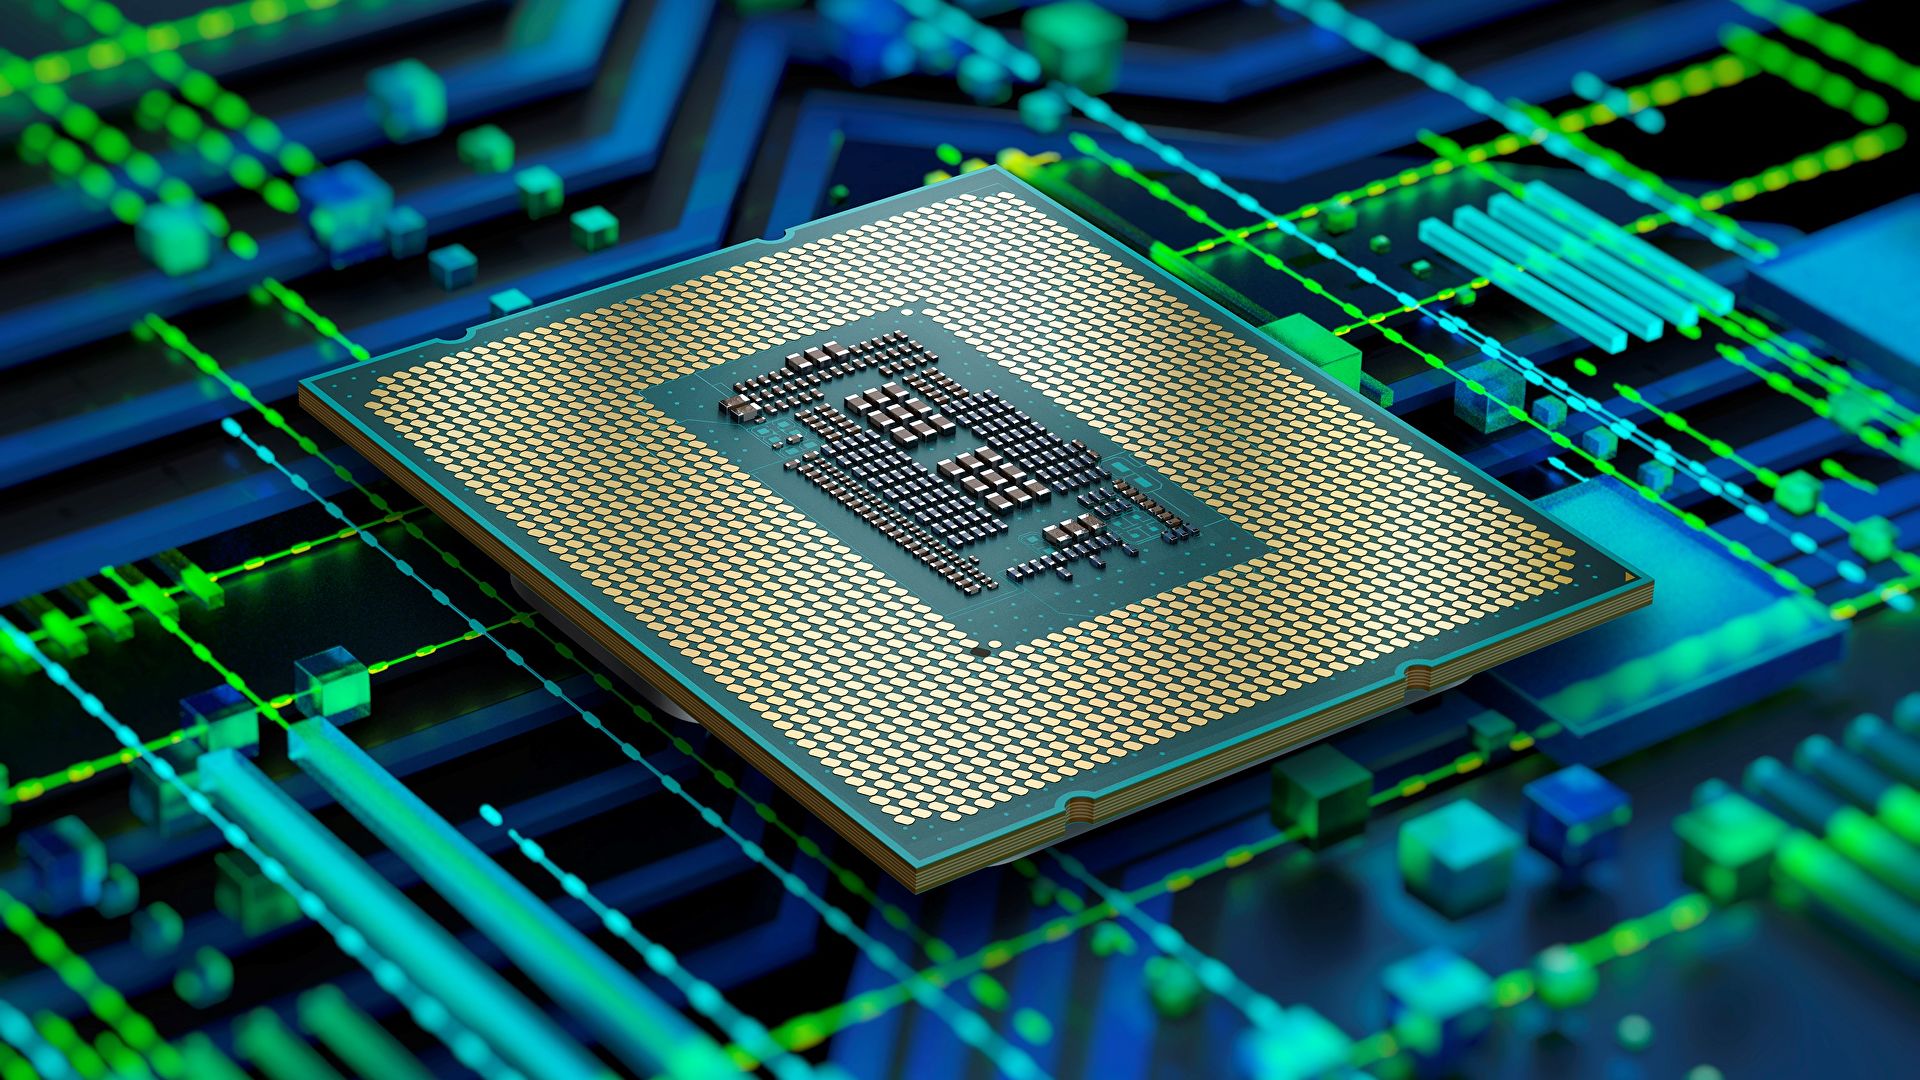  Intel's 13th Gen 13600 and below to be based on the older Alder Lake architecture 